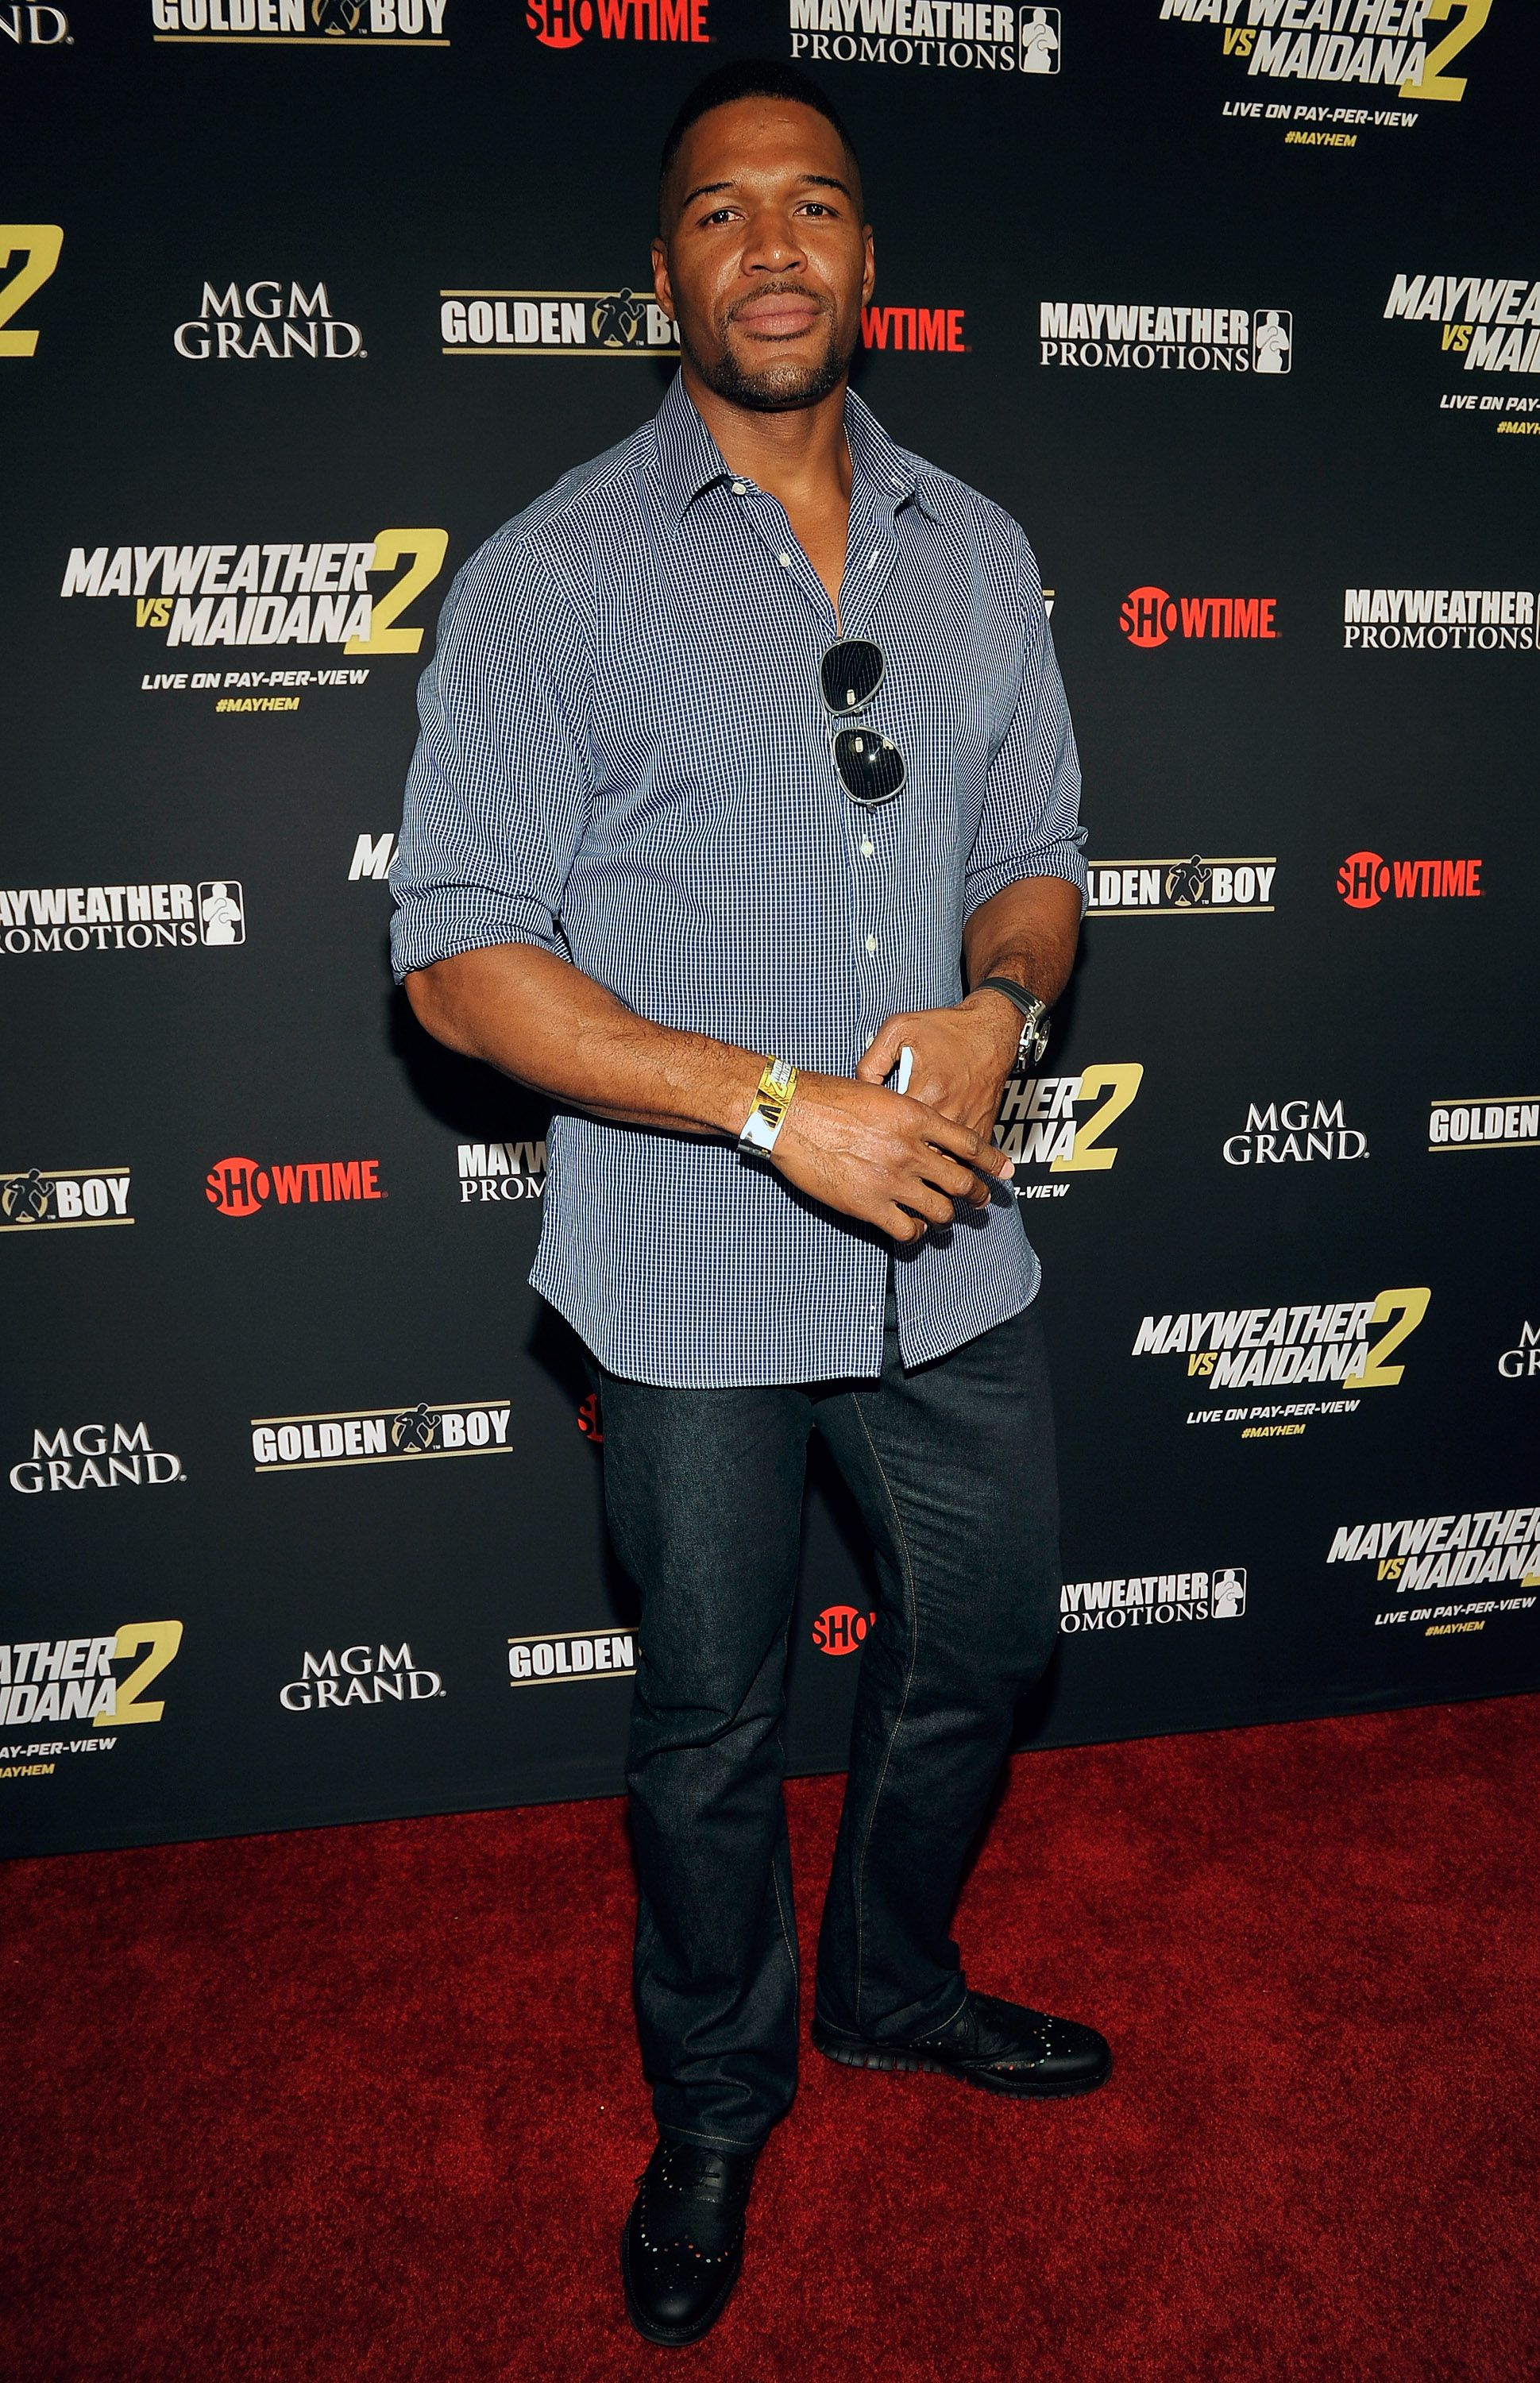 Michael Strahan during Showtime's VIP prefight party at the MGM Grand Garden Arena on September 13, 2014 in Las Vegas, Nevada. | Source: Getty Images